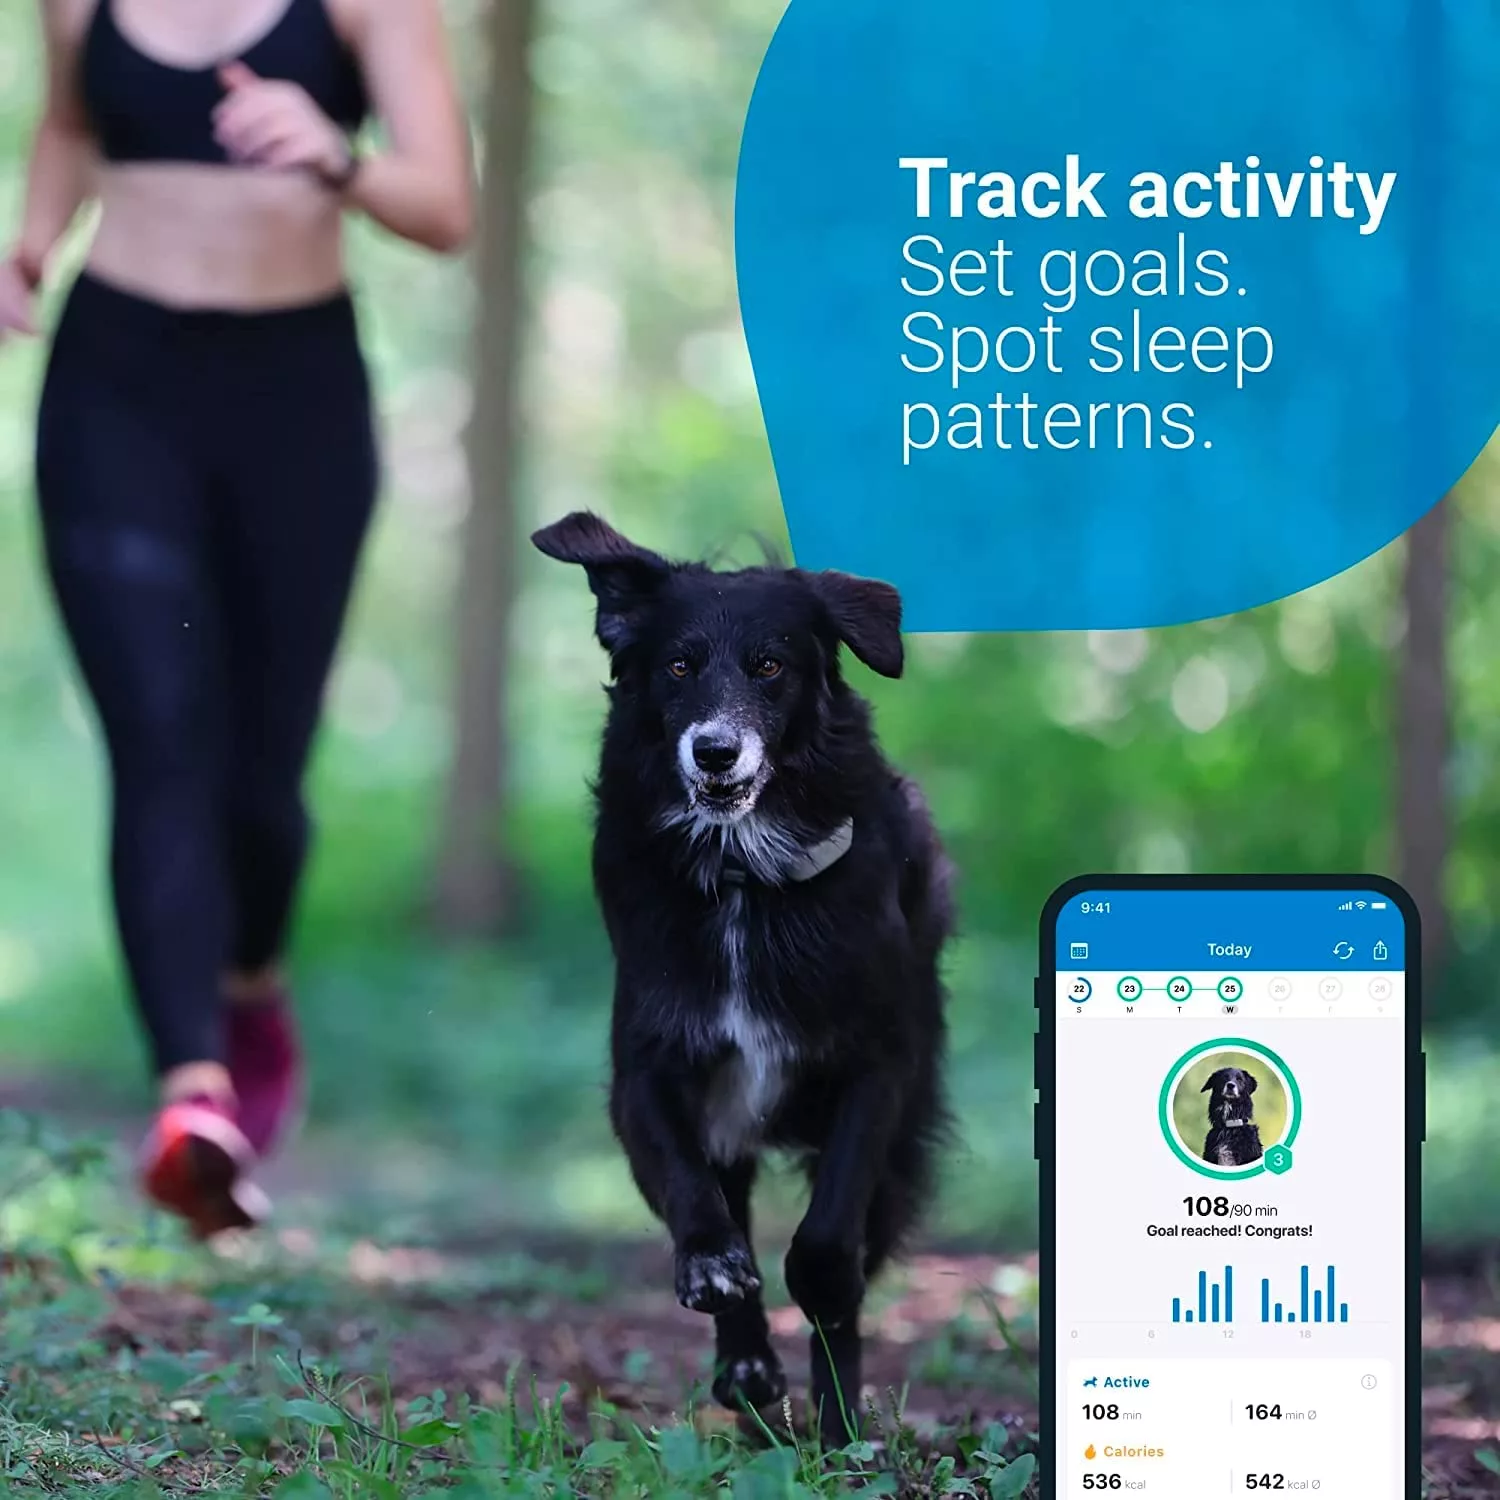 Track activity and set goals with the Tractive GPS Tracker